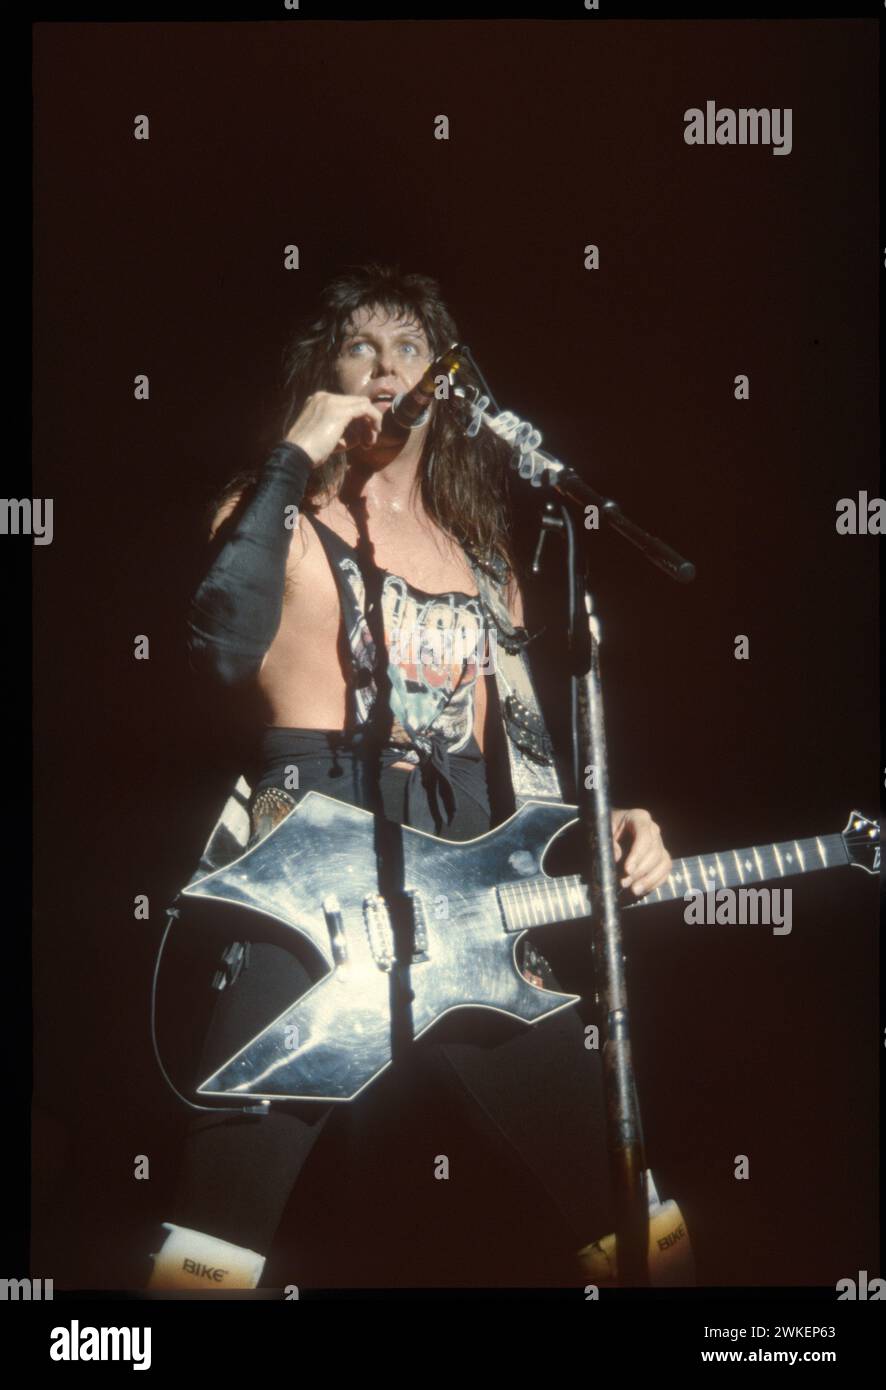 W.A.S.P. performing live at The Santa Monica Civic Auditorium in Santa Monica, CA USA on August 8, 1989.  Credit: Kevin Estrada / MediaPunch Stock Photo